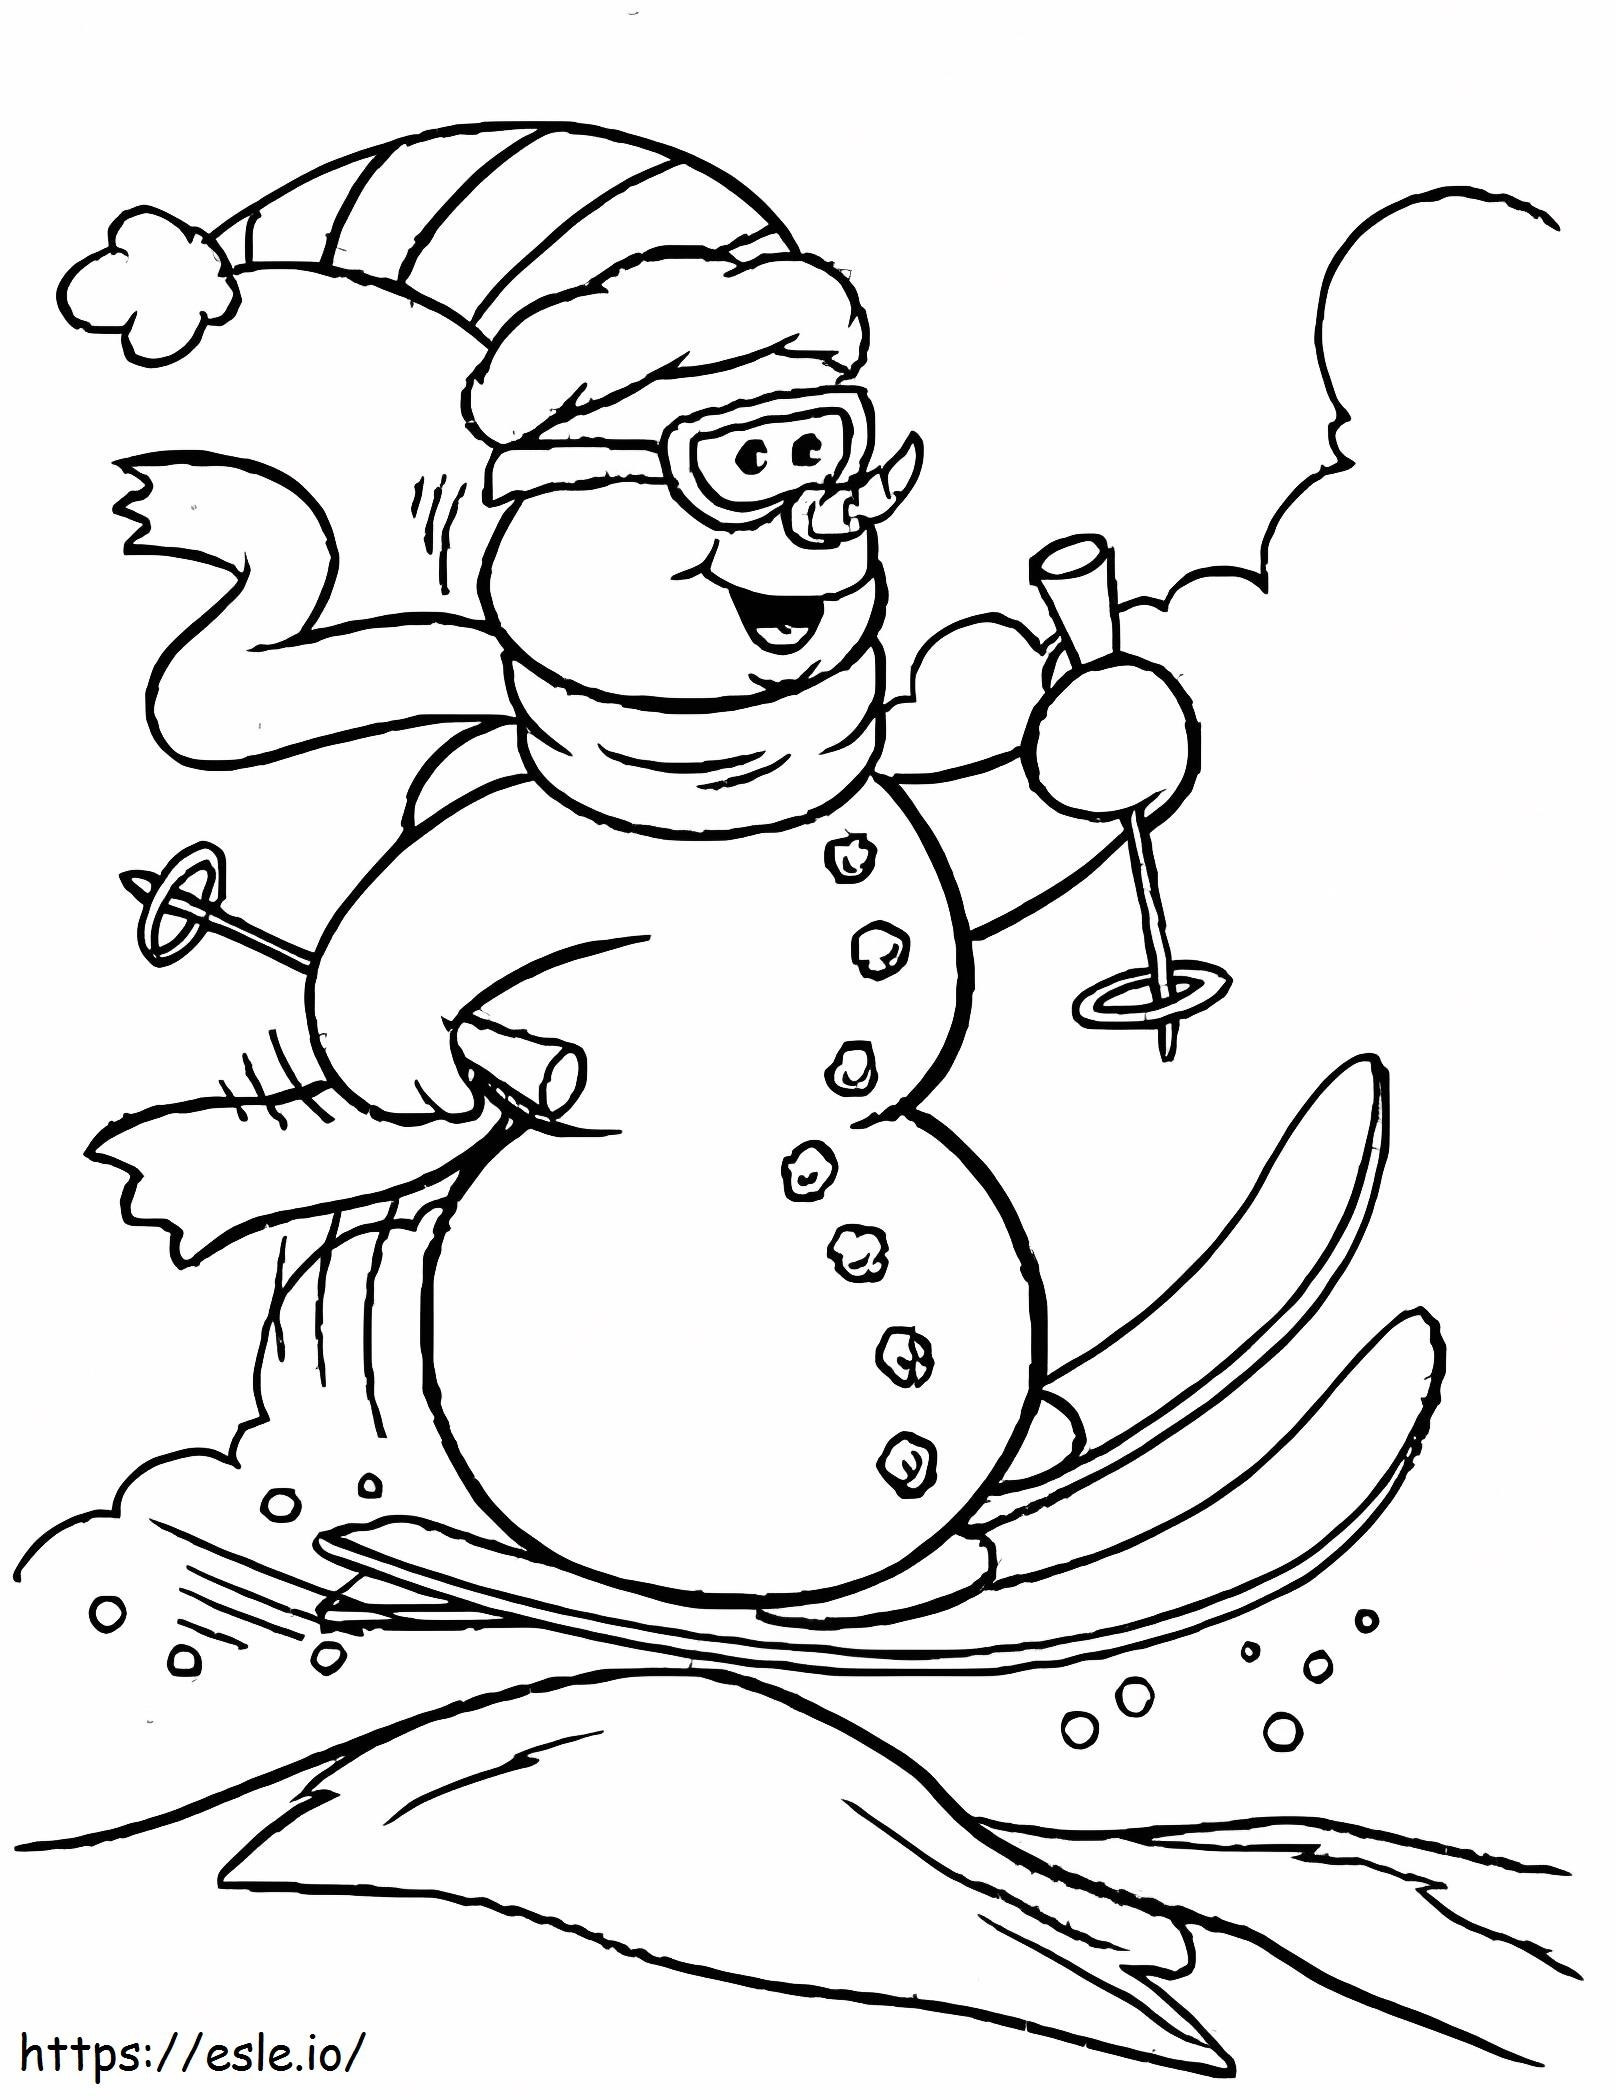 Snowman Skiing coloring page